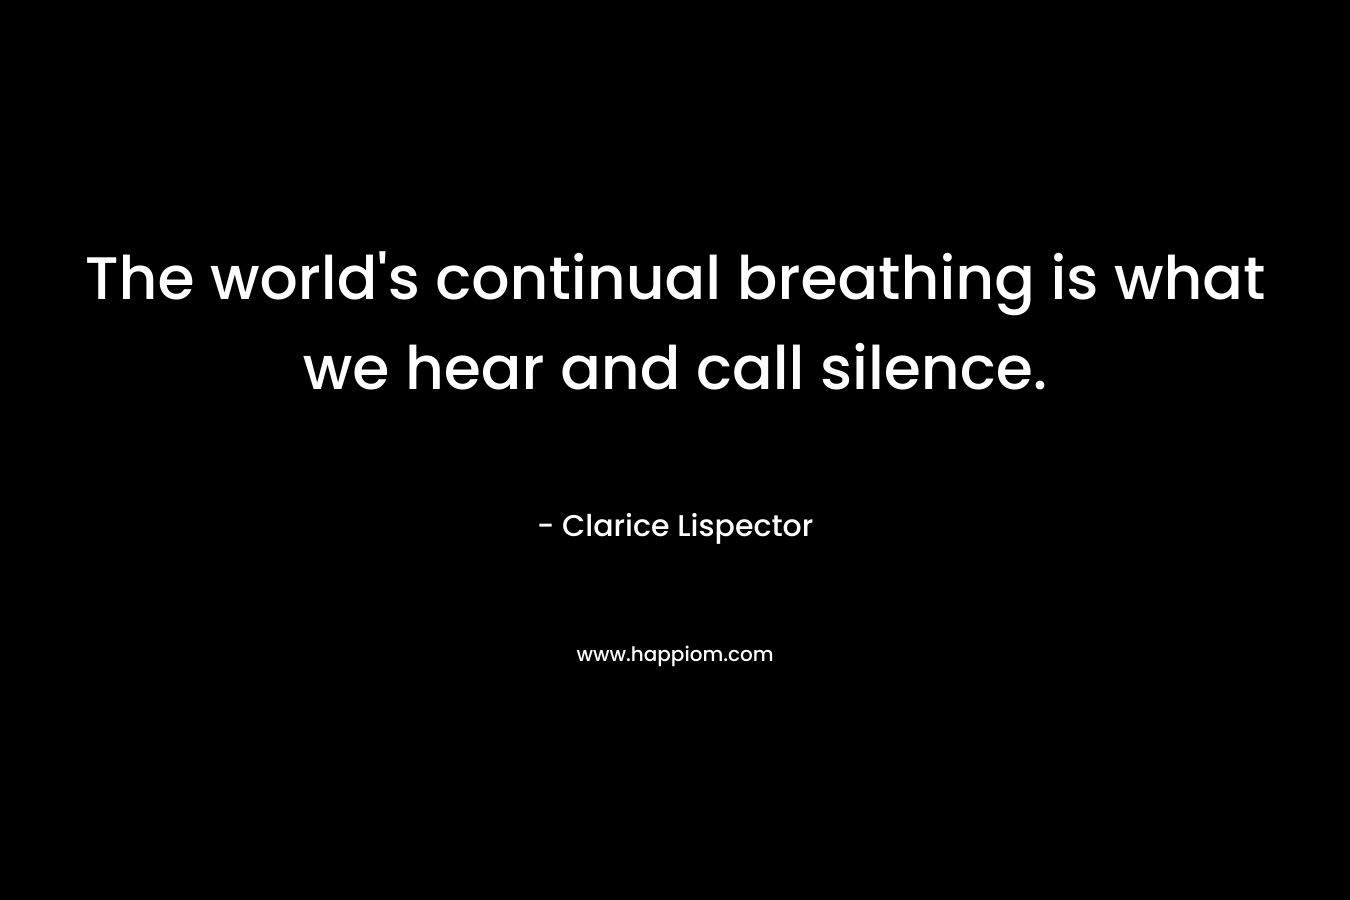 The world’s continual breathing is what we hear and call silence. – Clarice Lispector